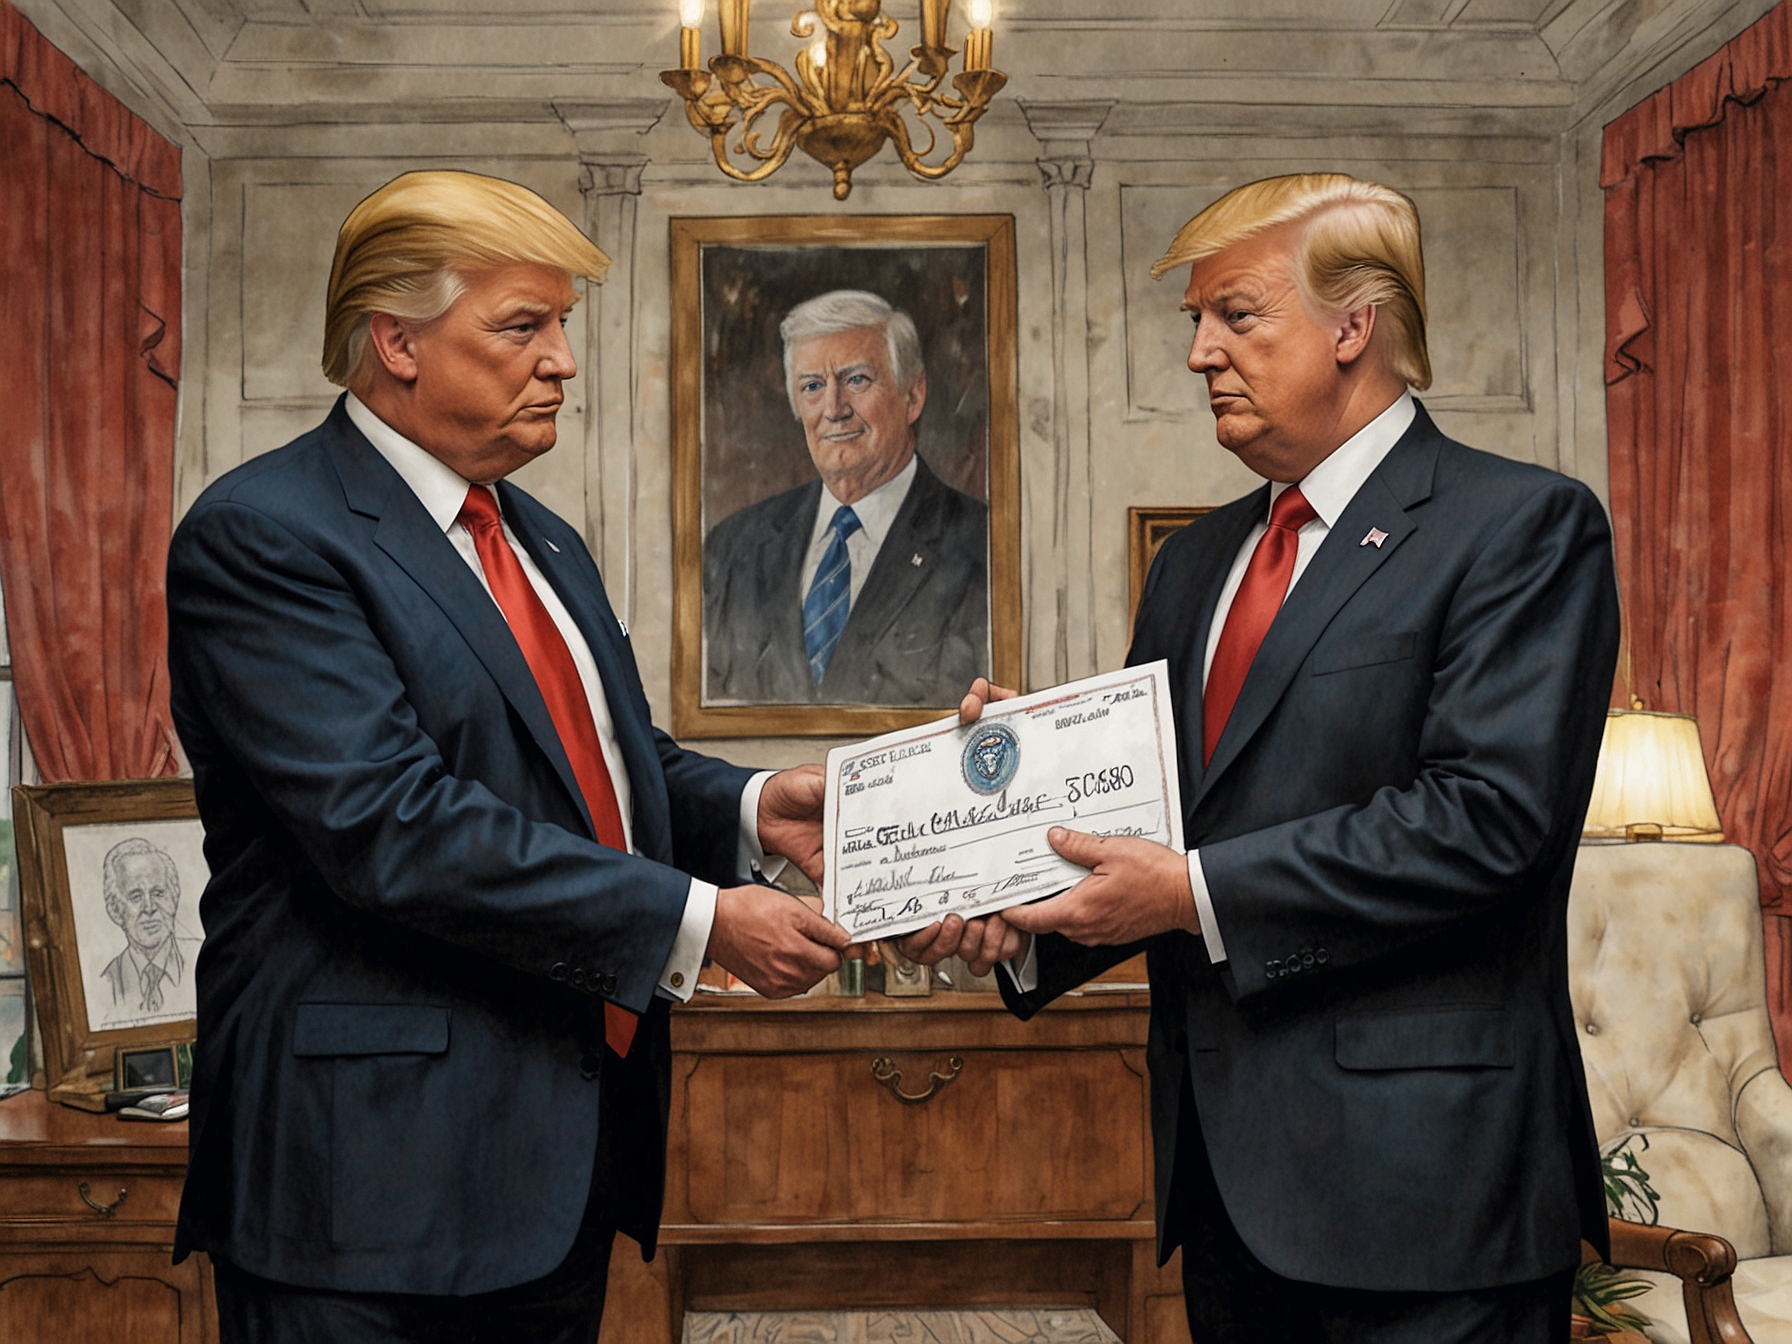 An image of Timothy Mellon handing over a large ceremonial check to a representative of the pro-Trump super PAC, symbolizing his massive $50 million contribution to support Trump's campaign.